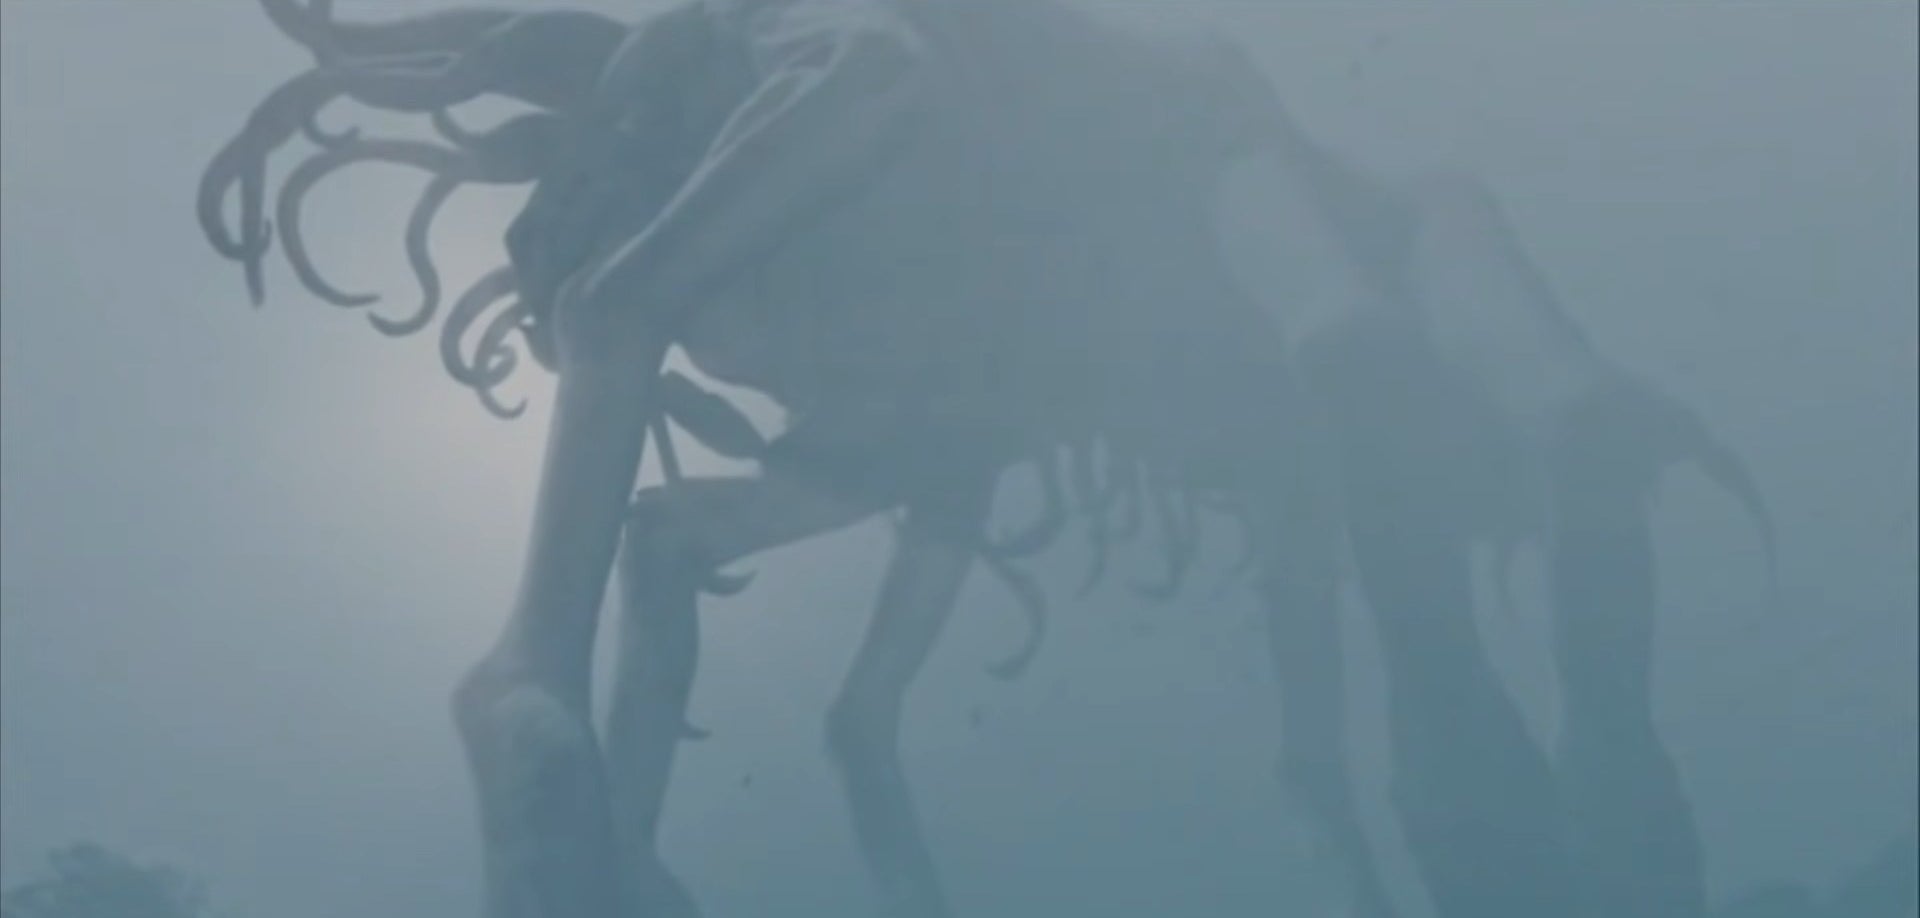 The Impossibly-Tall Creature in &quot;The Mist&quot; (2007)